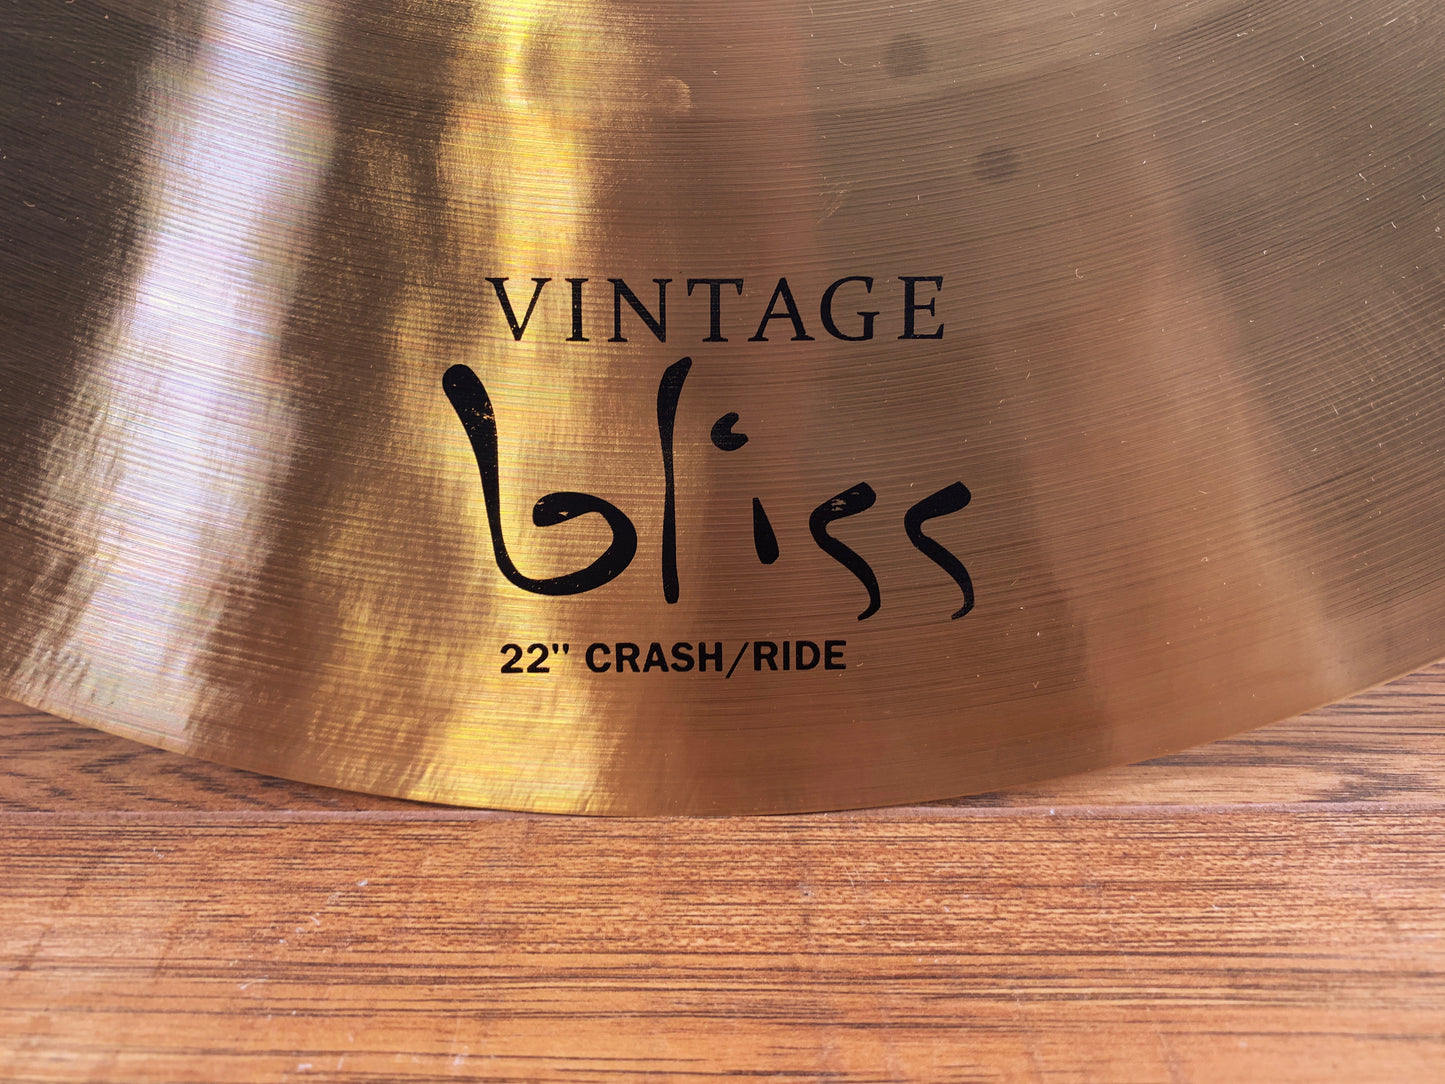 Dream Cymbals VBCRRI22 Vintage Bliss Hand Forged & Hammered 22" Crash Ride